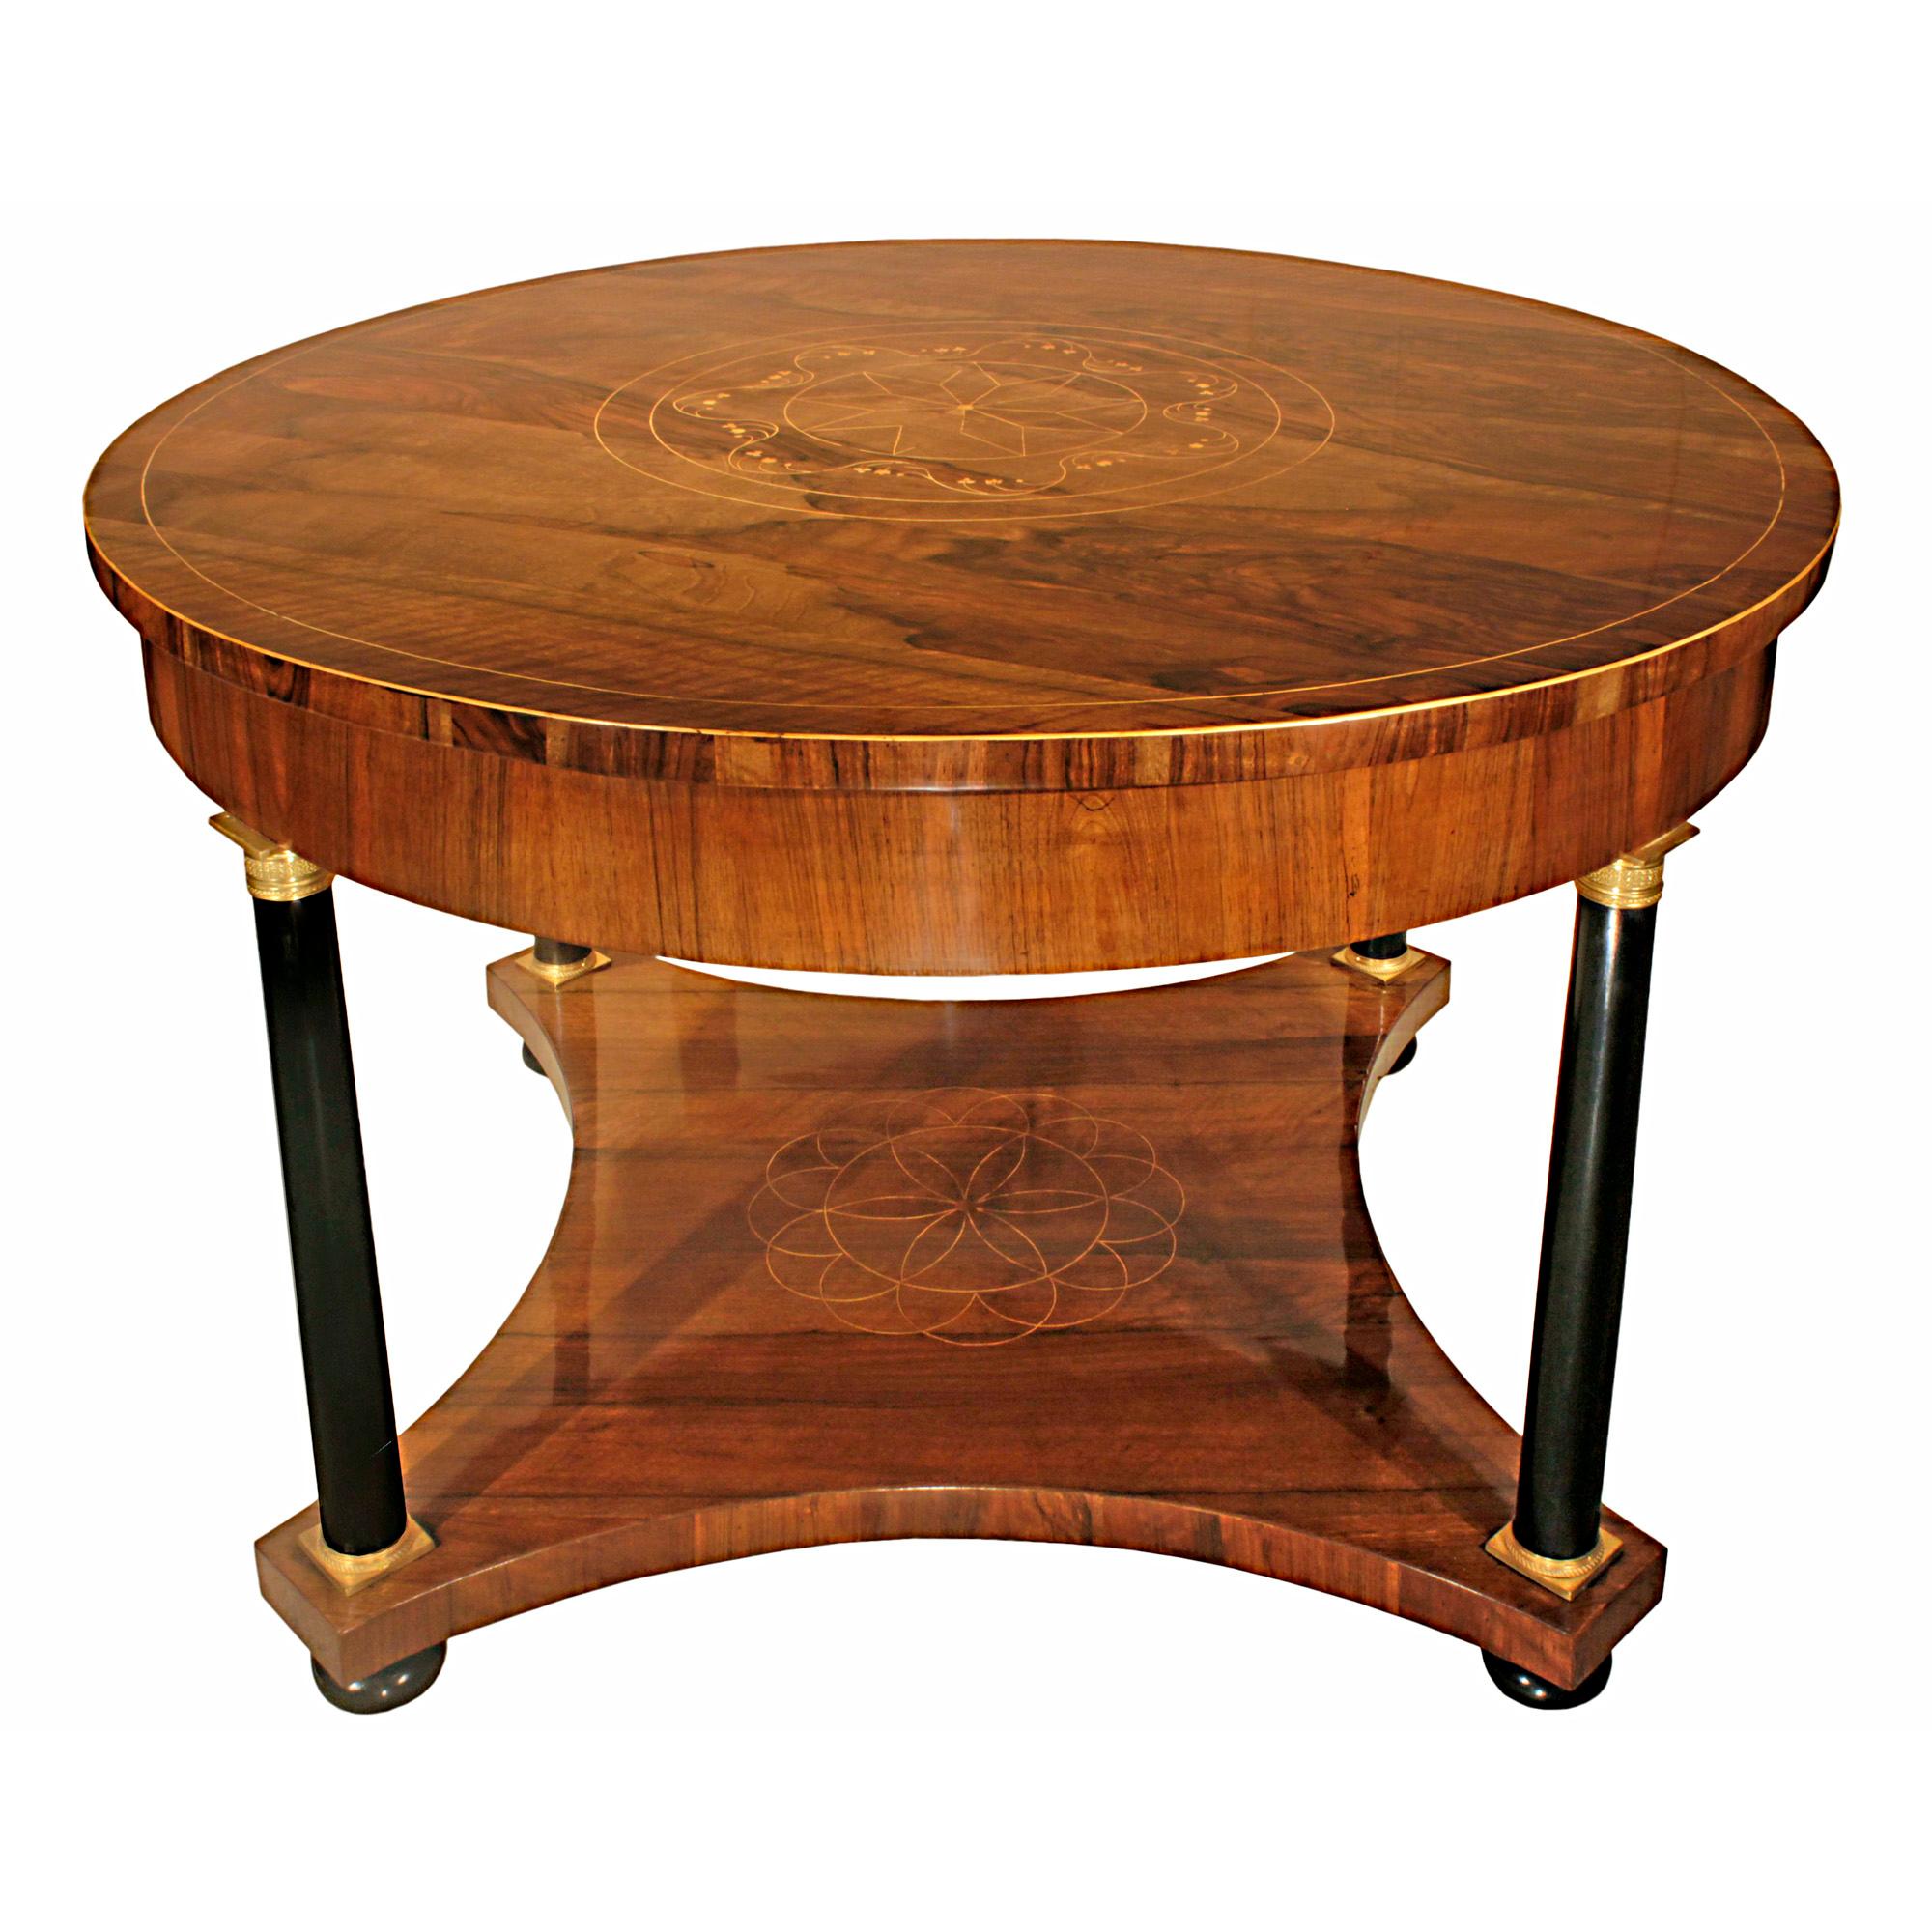 A magnificent Italian 19th century round ormolu mounted ebonized fruitwood and crouch mahogany center table with cherry wood inlay. The table is raised by four ball feet below the concave stretcher with a cherry wood inlaid radial design of the seed